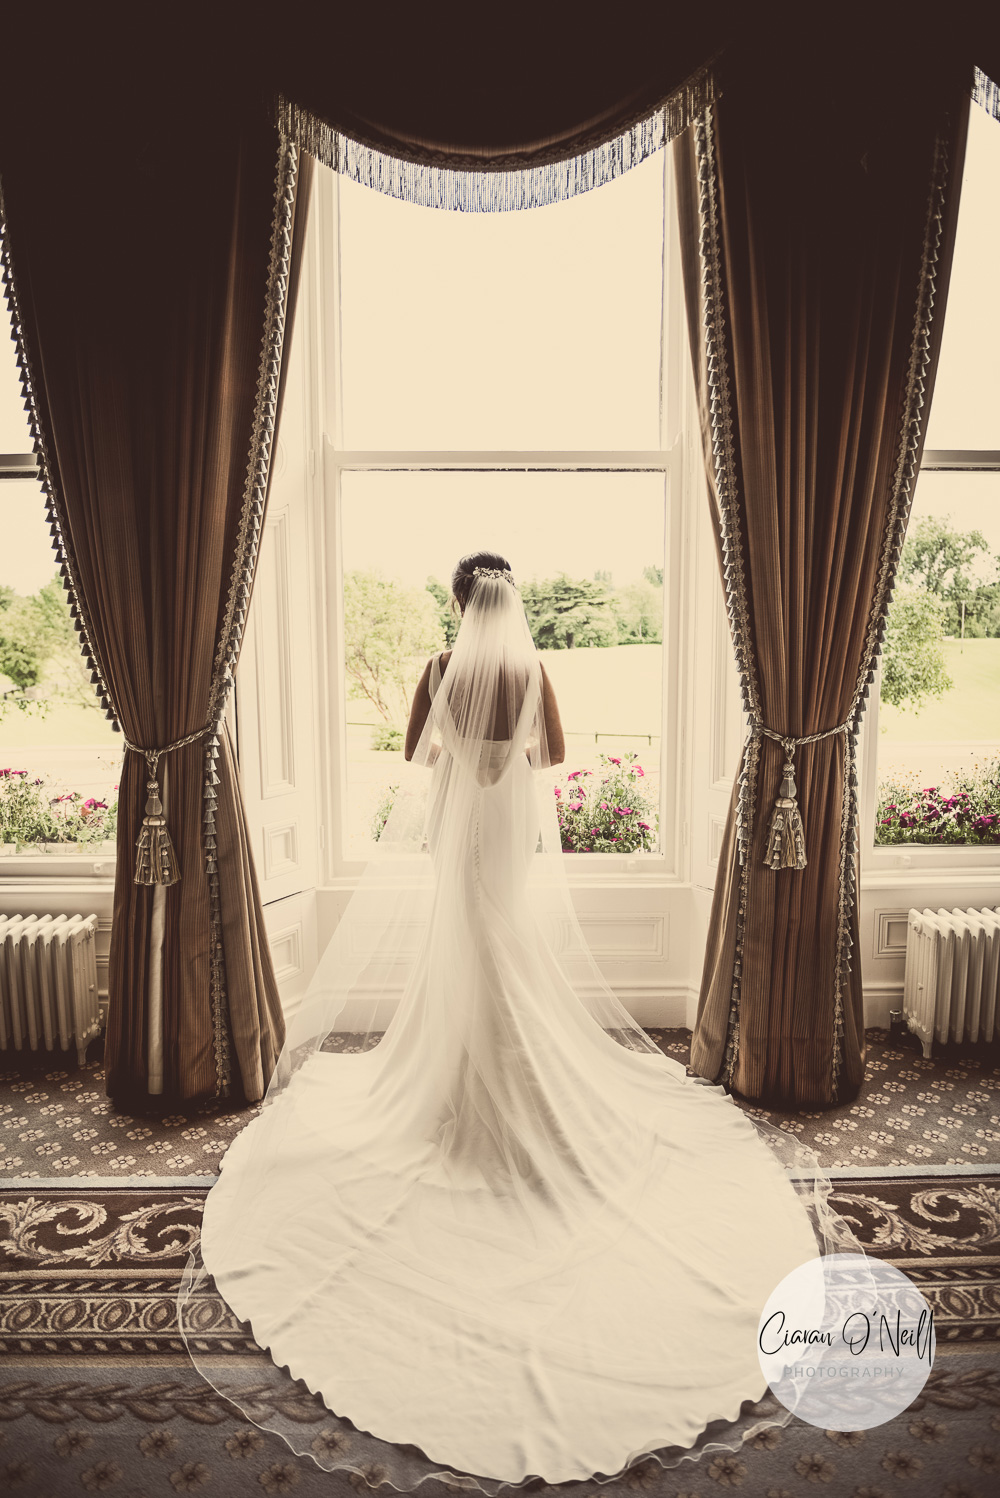 Bride looking out at the view